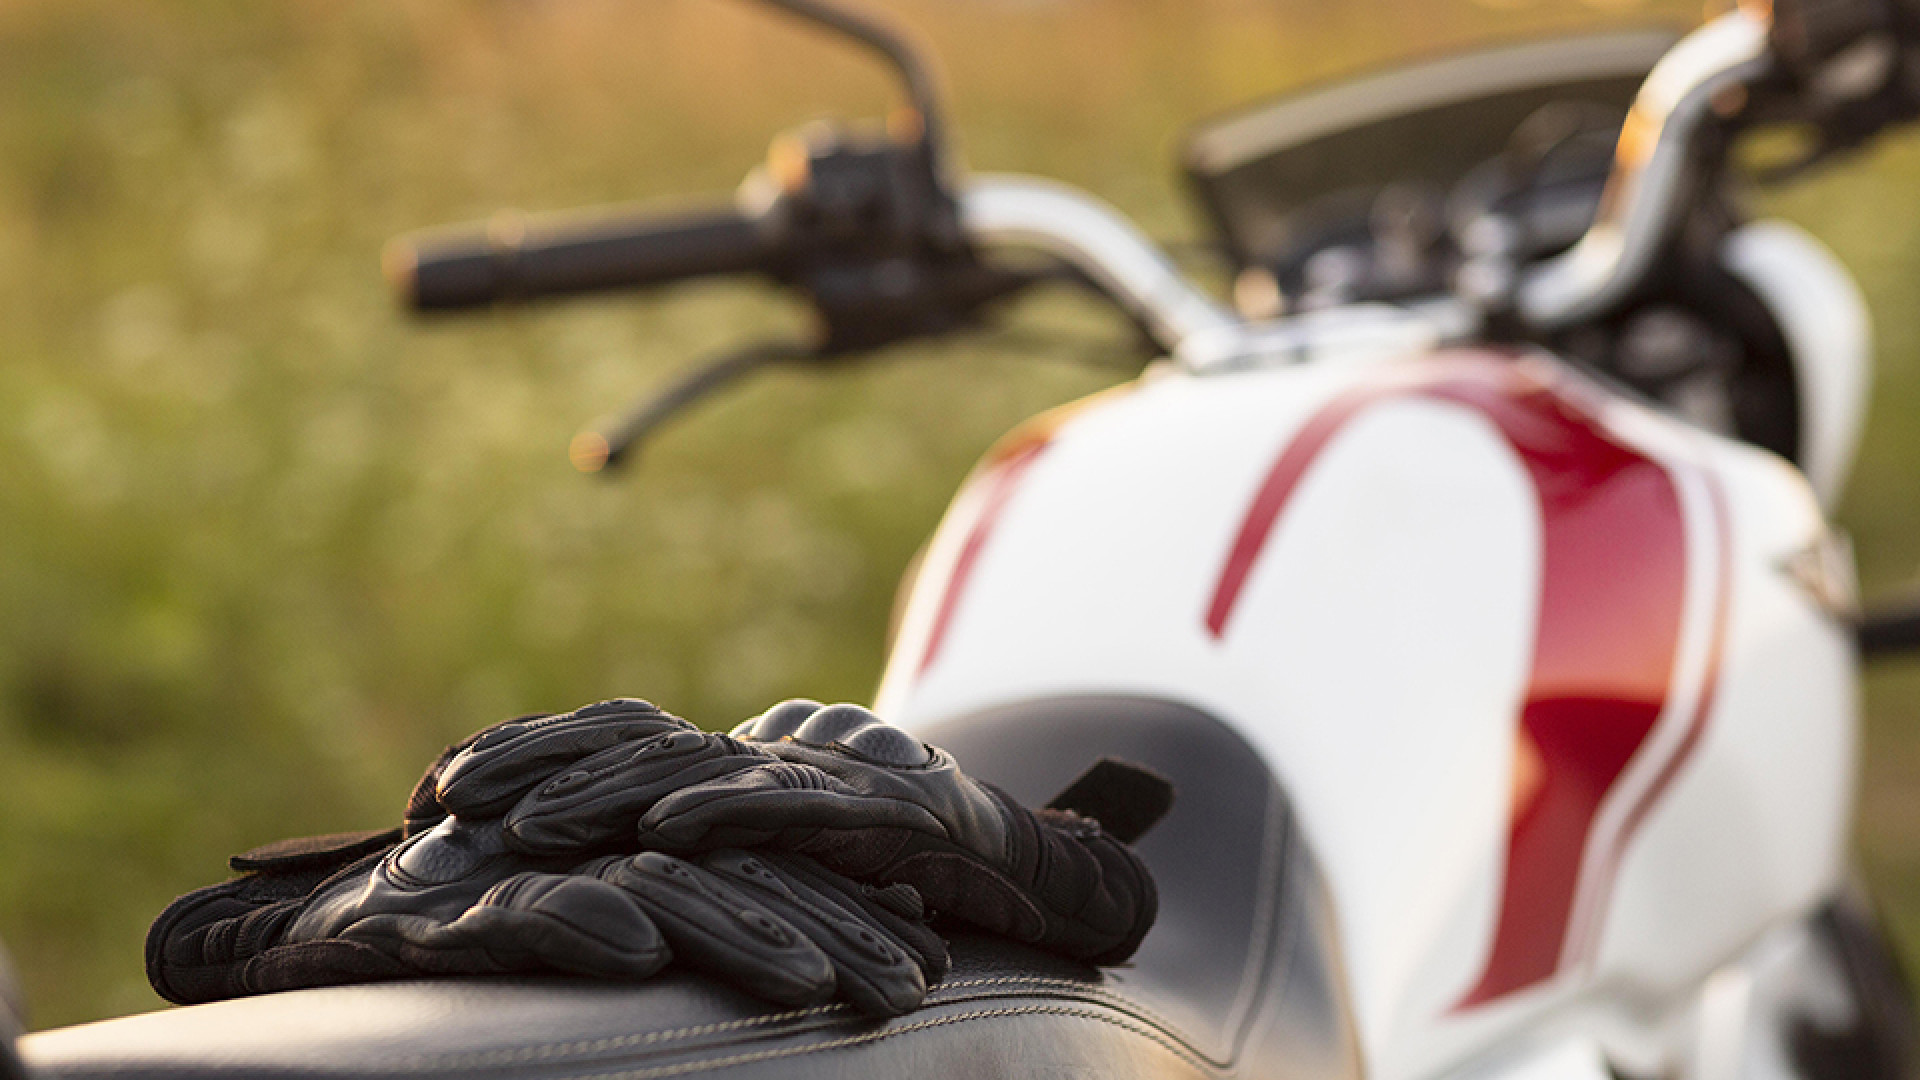 The Ultimate Guide to Motorcycle Gear